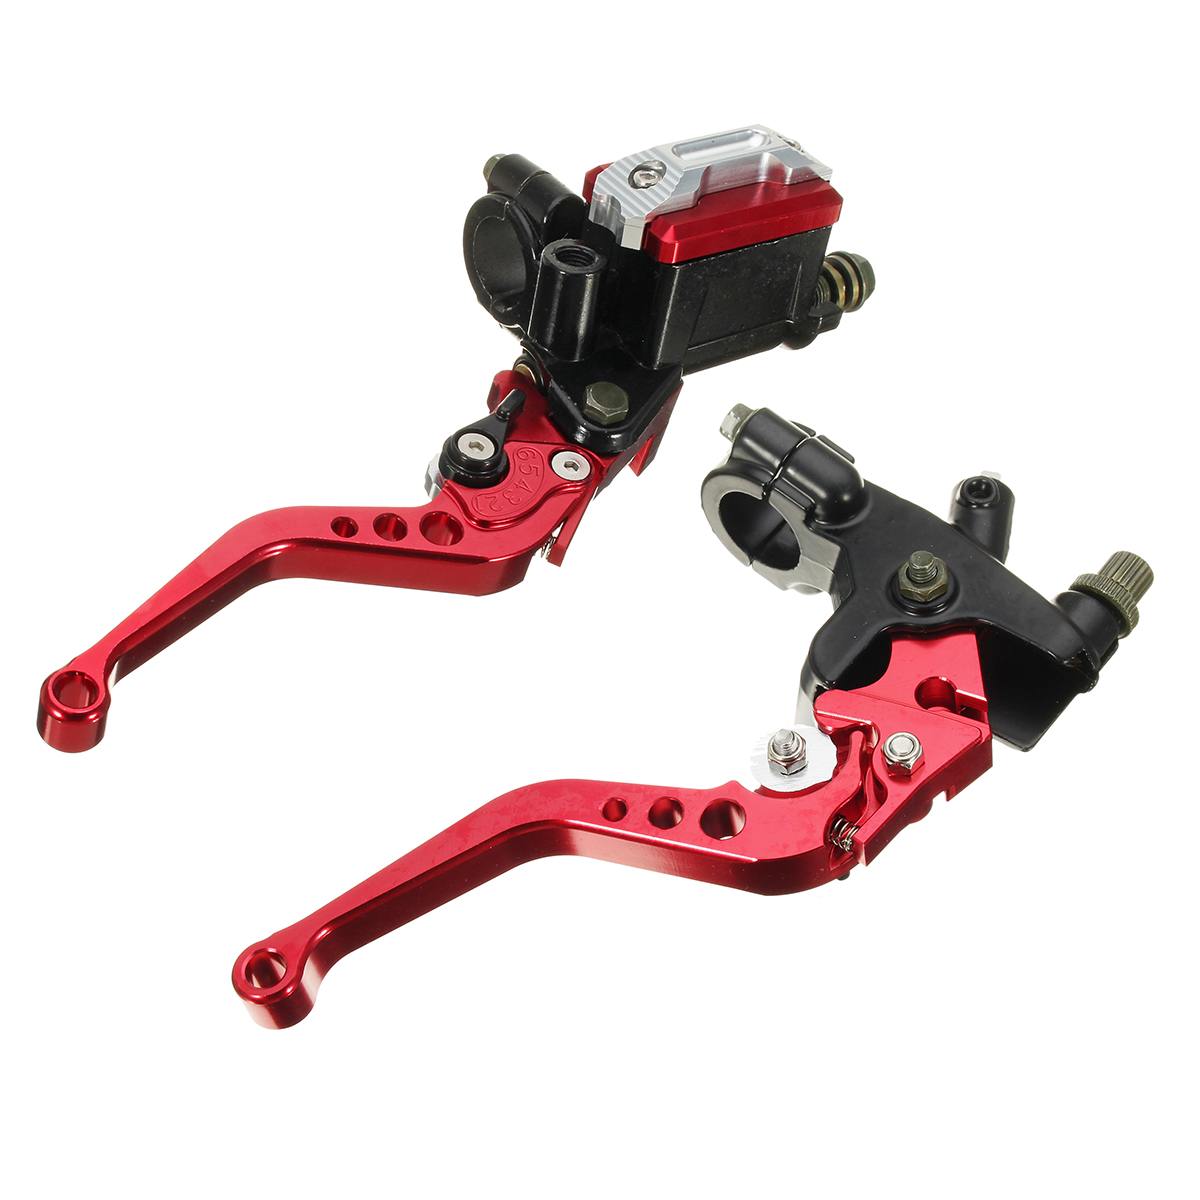 7/8inch 22mm Universal Motorcycle Brake Handles Handlebars Hydraulic Clutch Master Cylinder Levers Pit Pro For HONDA For Yamaha